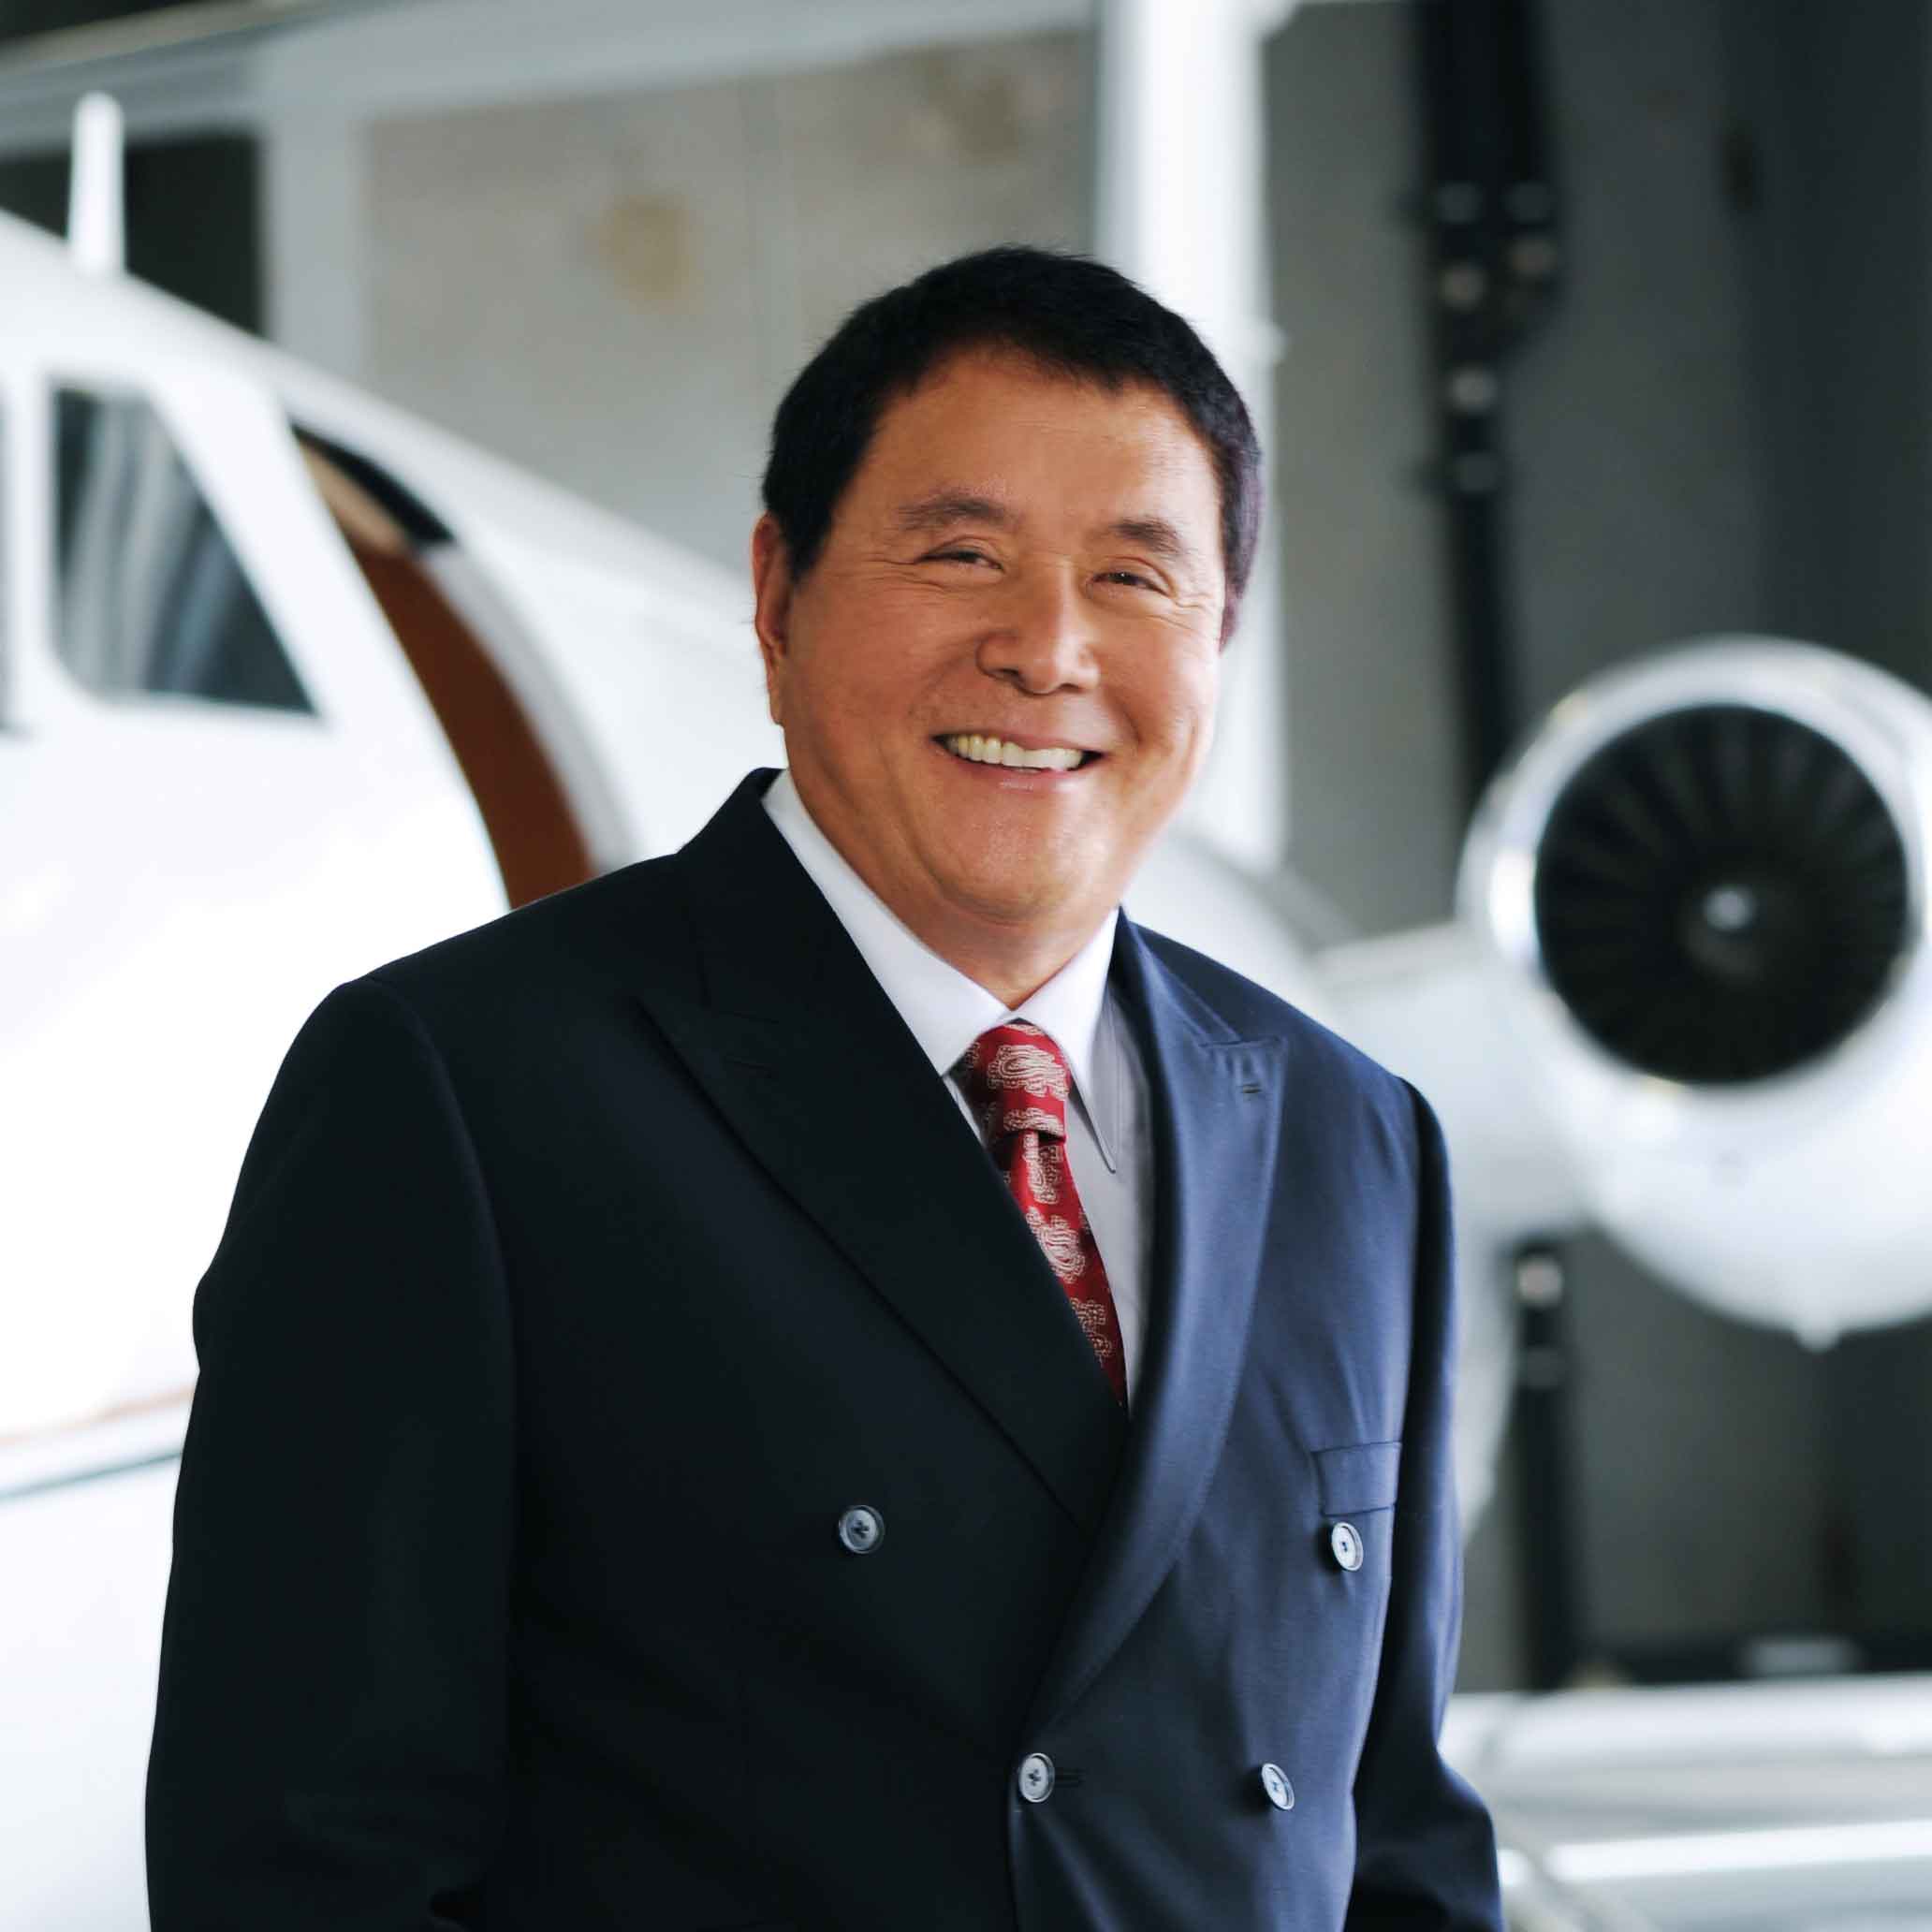 Robert Kiyosaki standing by a private jet in an airplane hanger